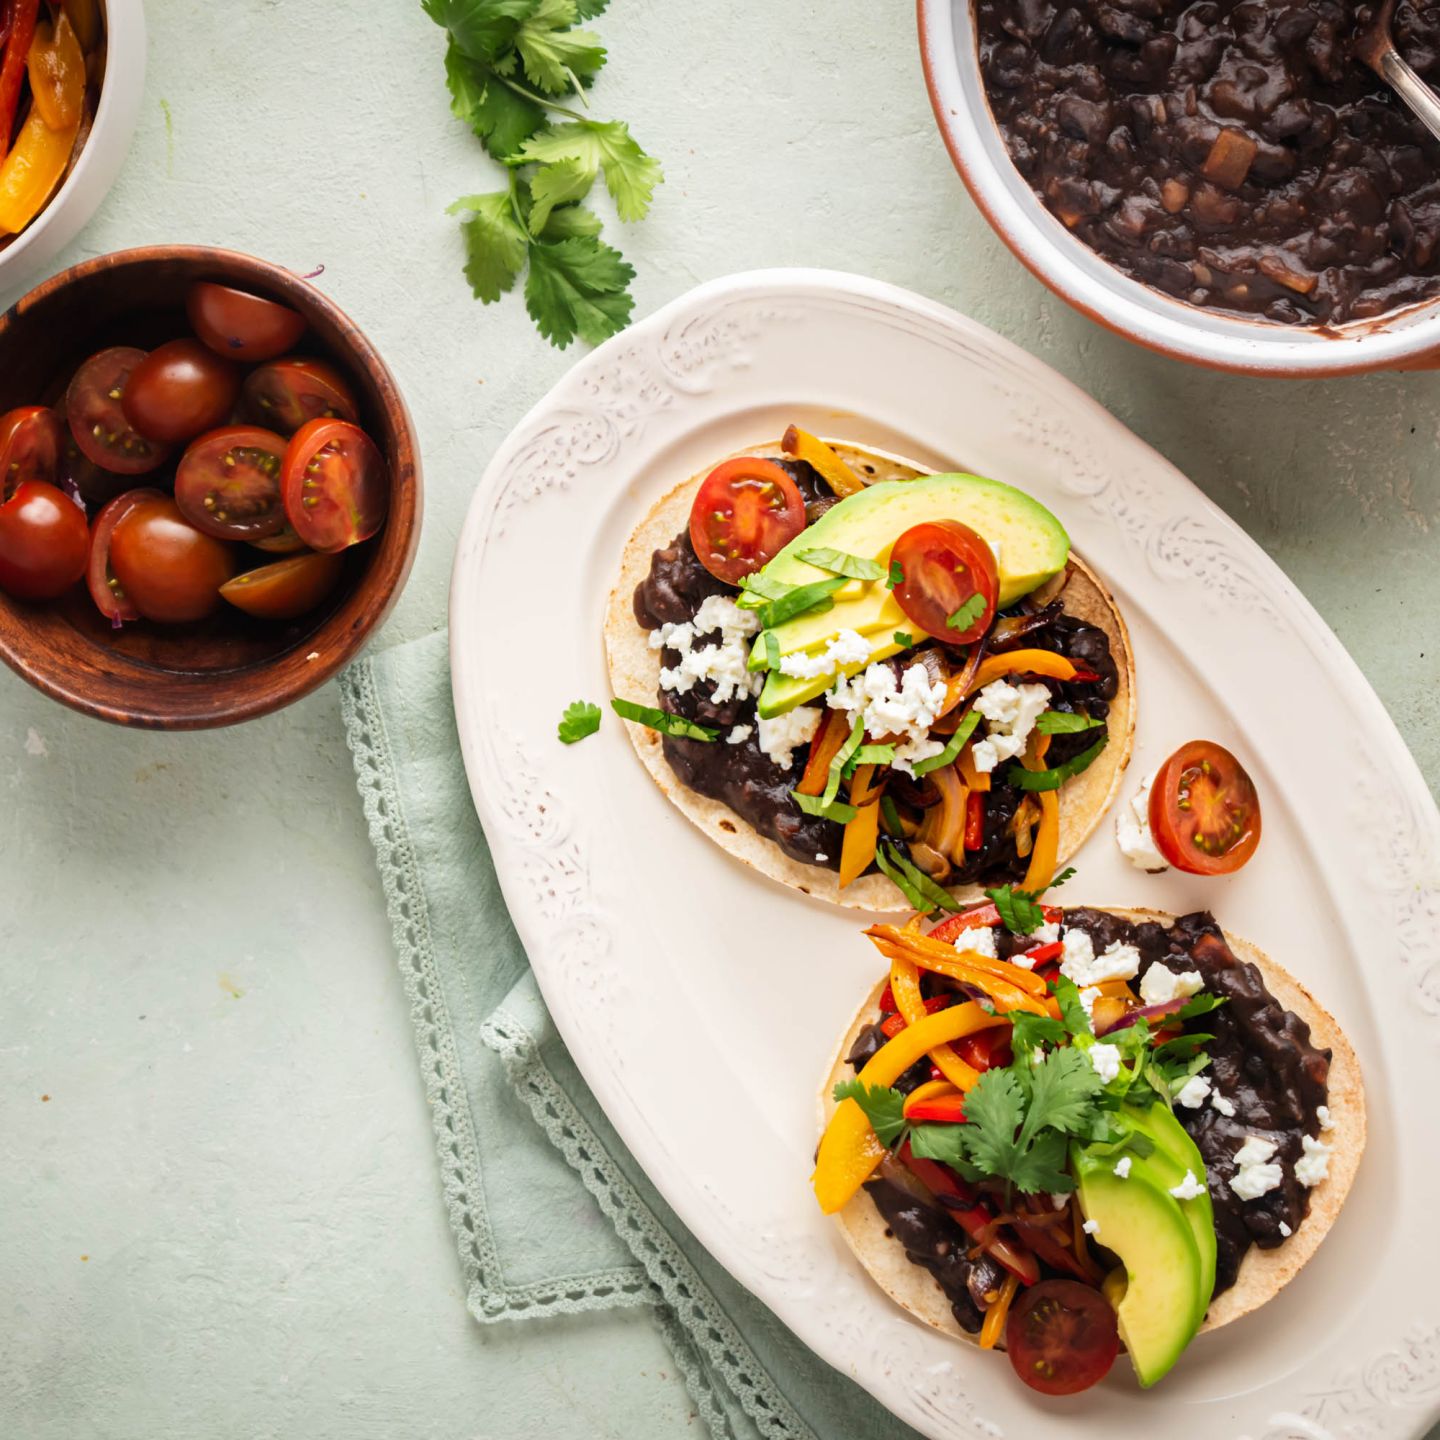 Black bean tostadas served on crispy baked tostada shells with peppers, onions, avocado, cheese, and tomatoes.